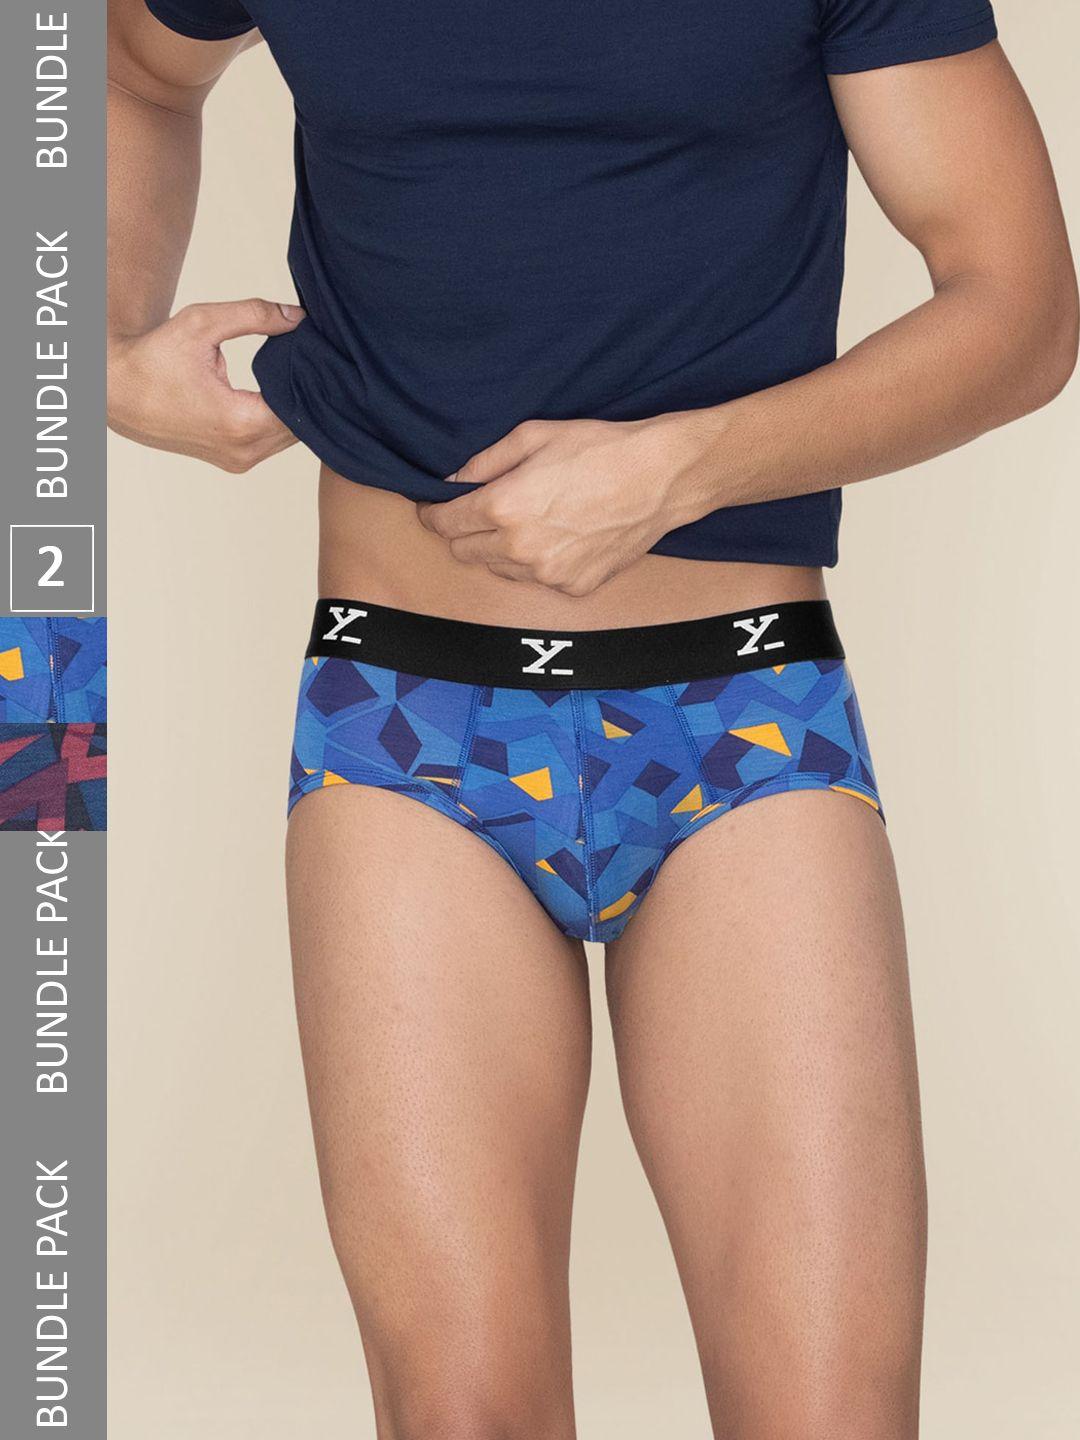 xyxx-men-pack-of-2-printed-basic-briefs-xybrf2pckn712